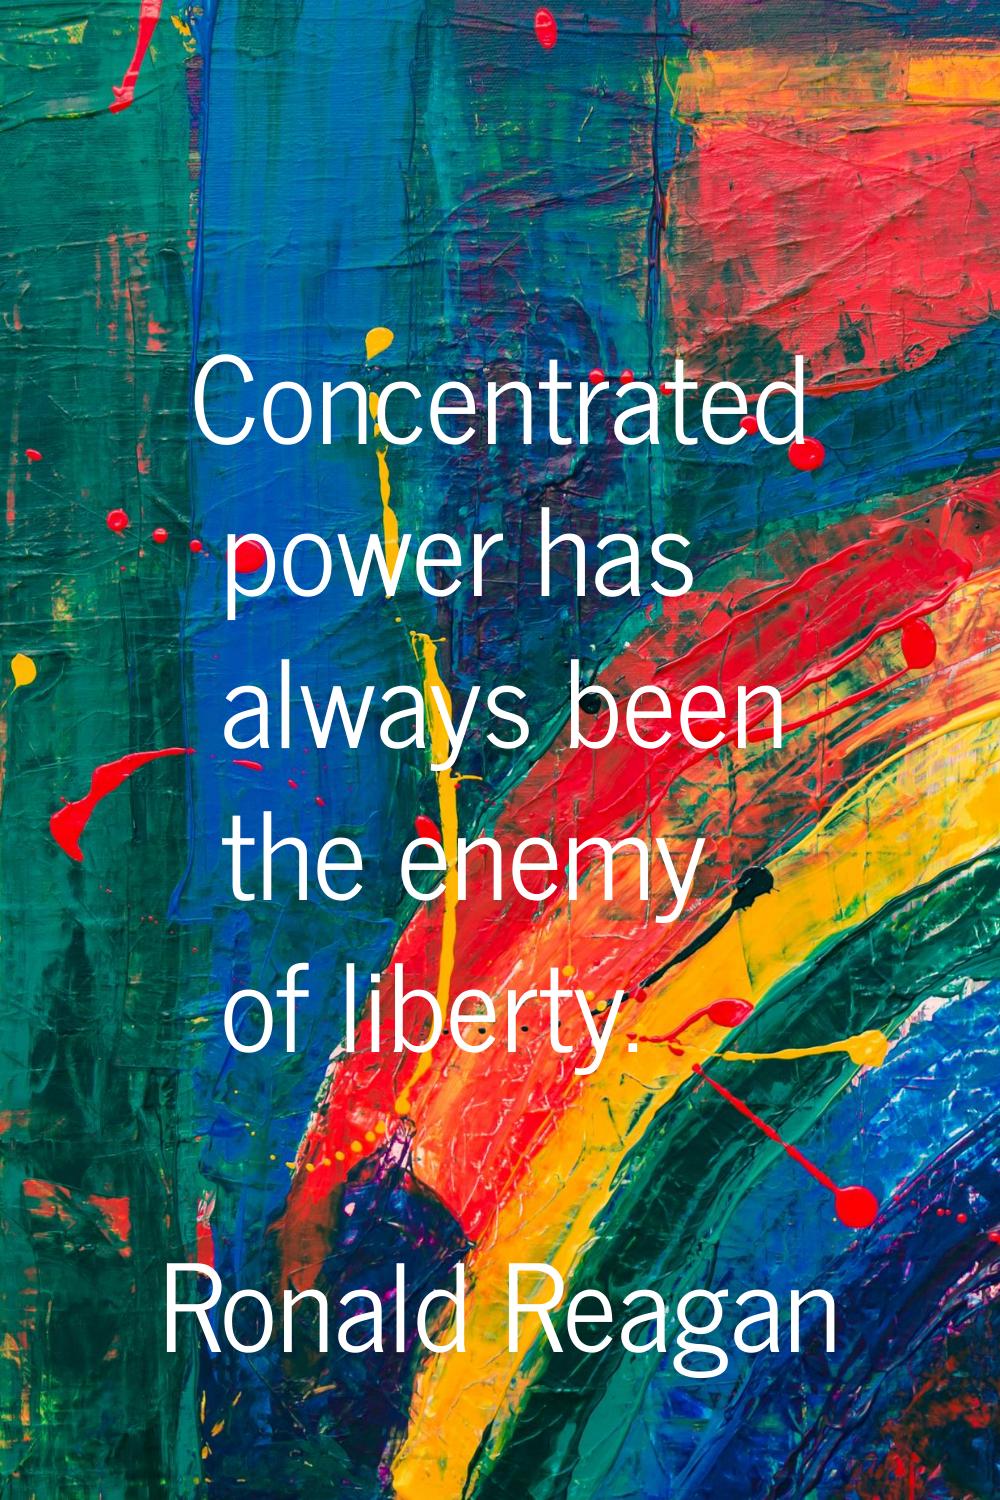 Concentrated power has always been the enemy of liberty.